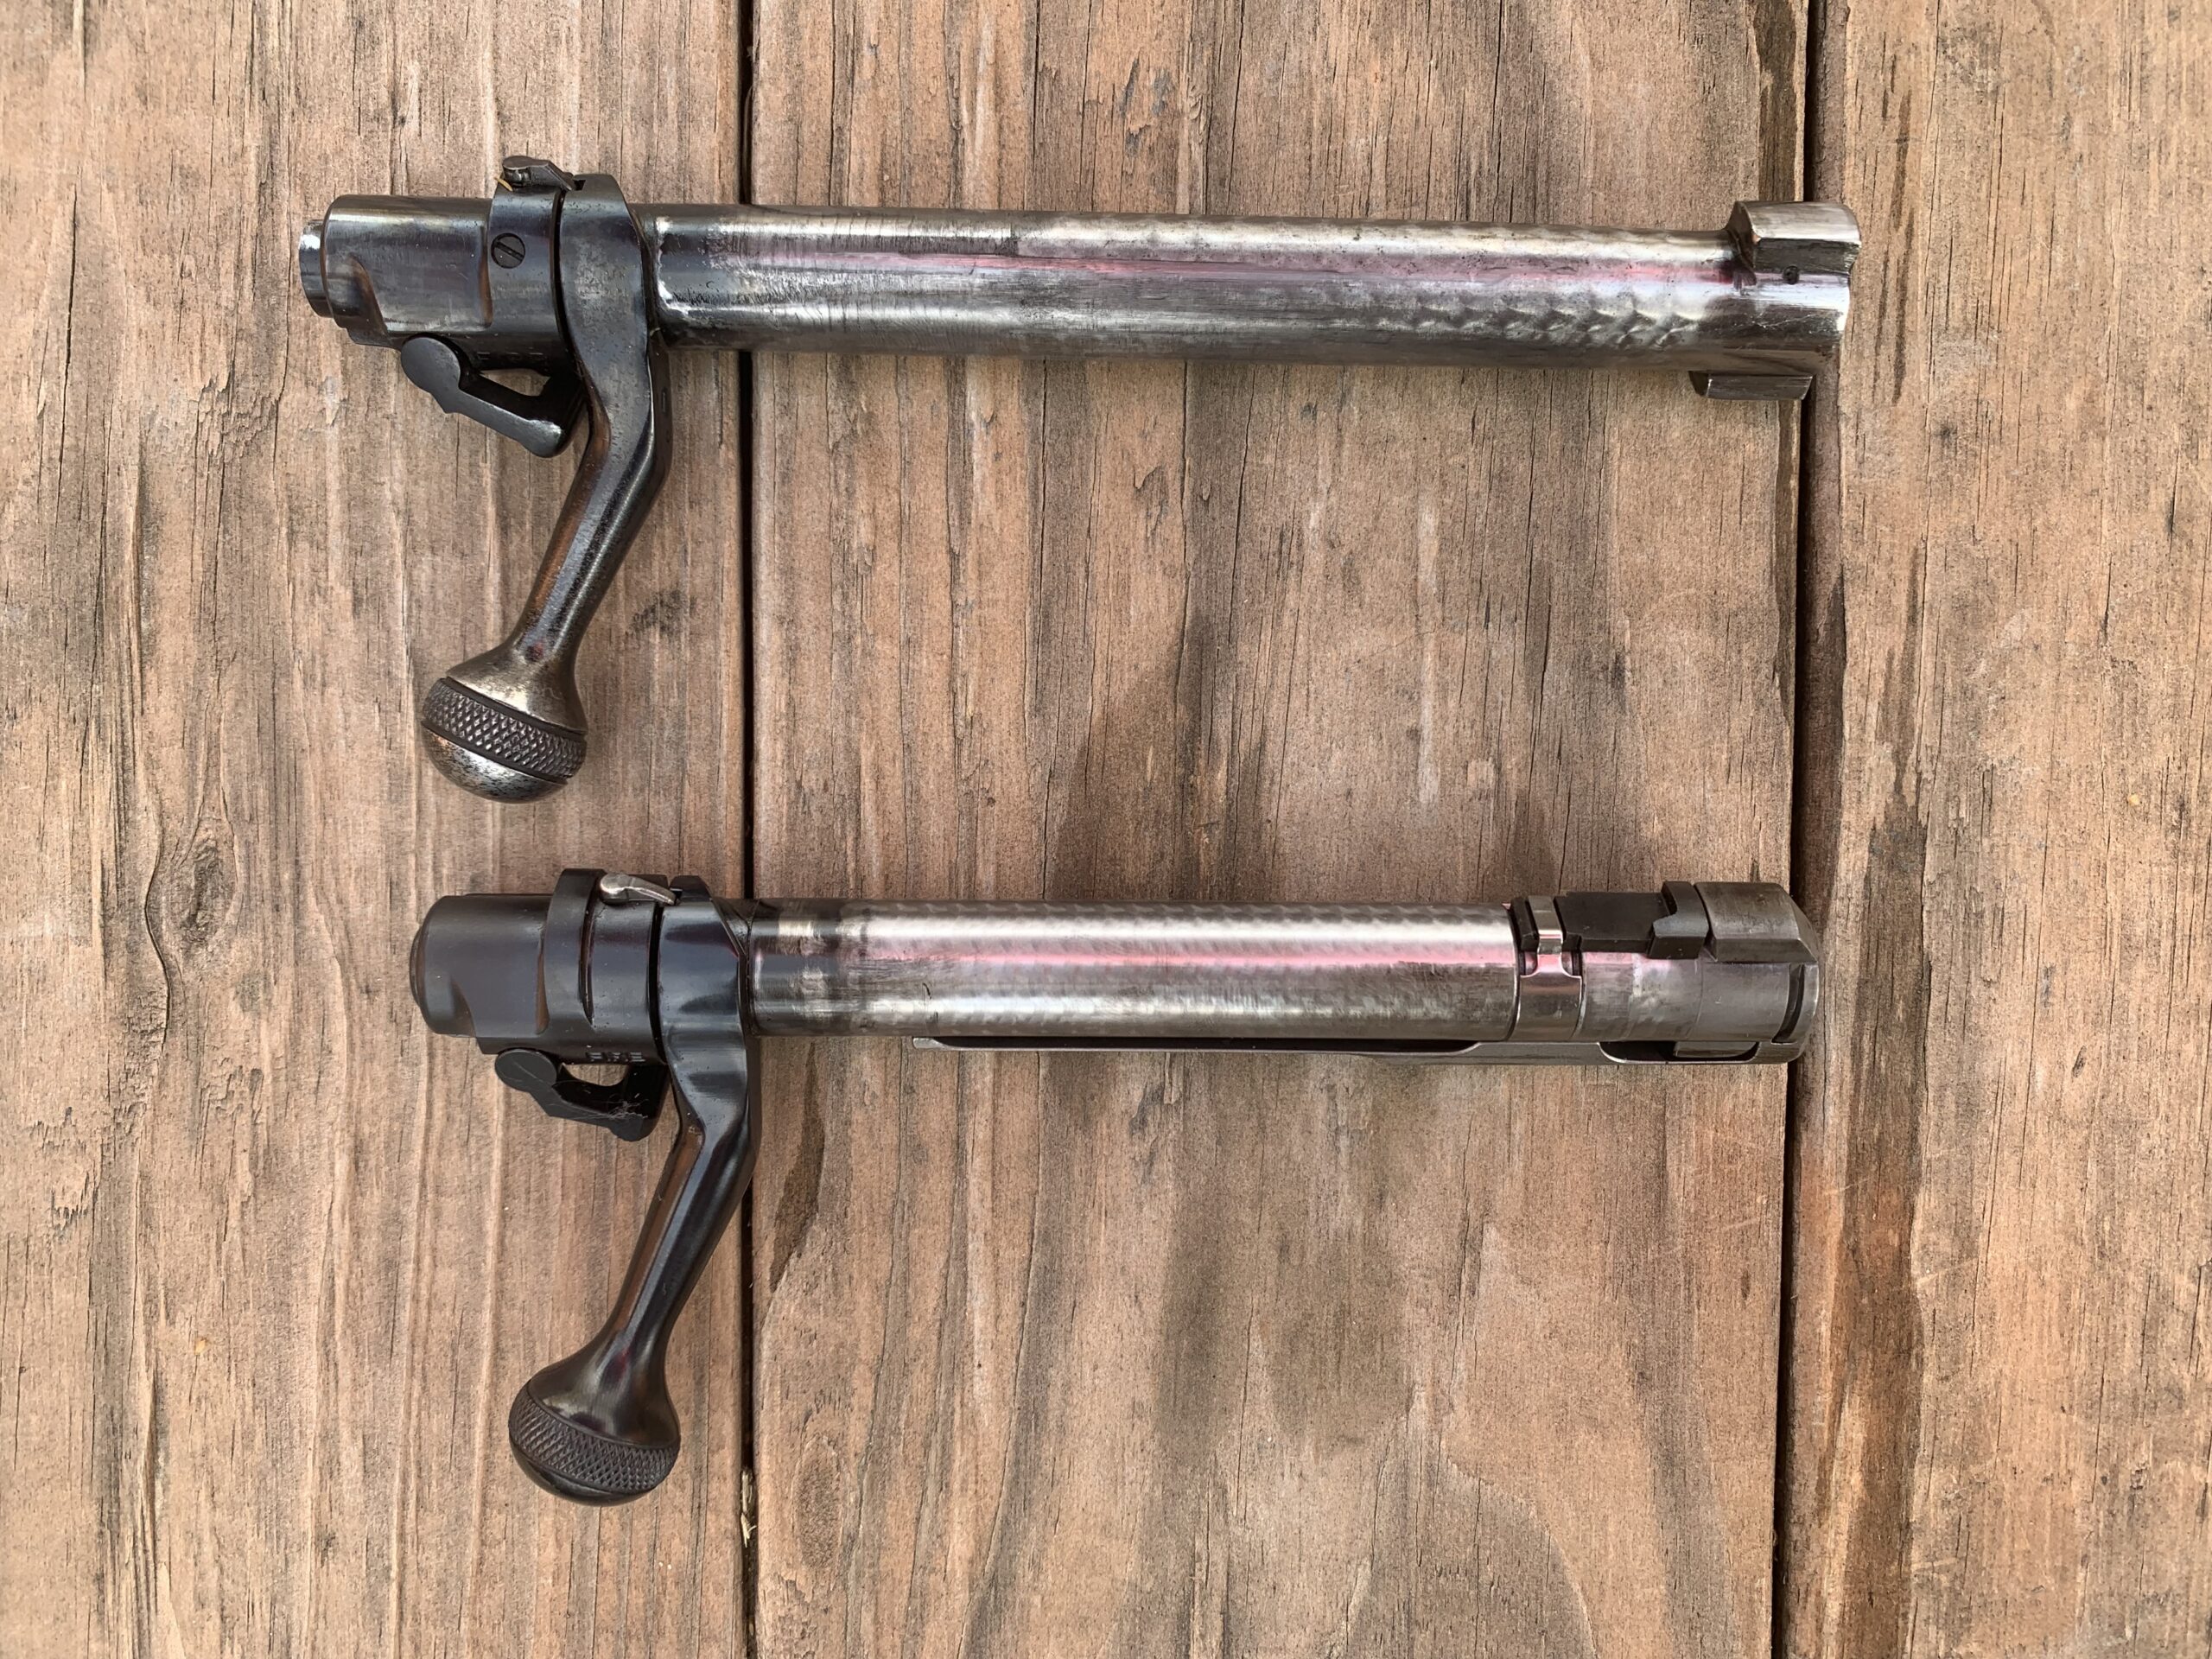 Push and controlled-feed Winchester bolts